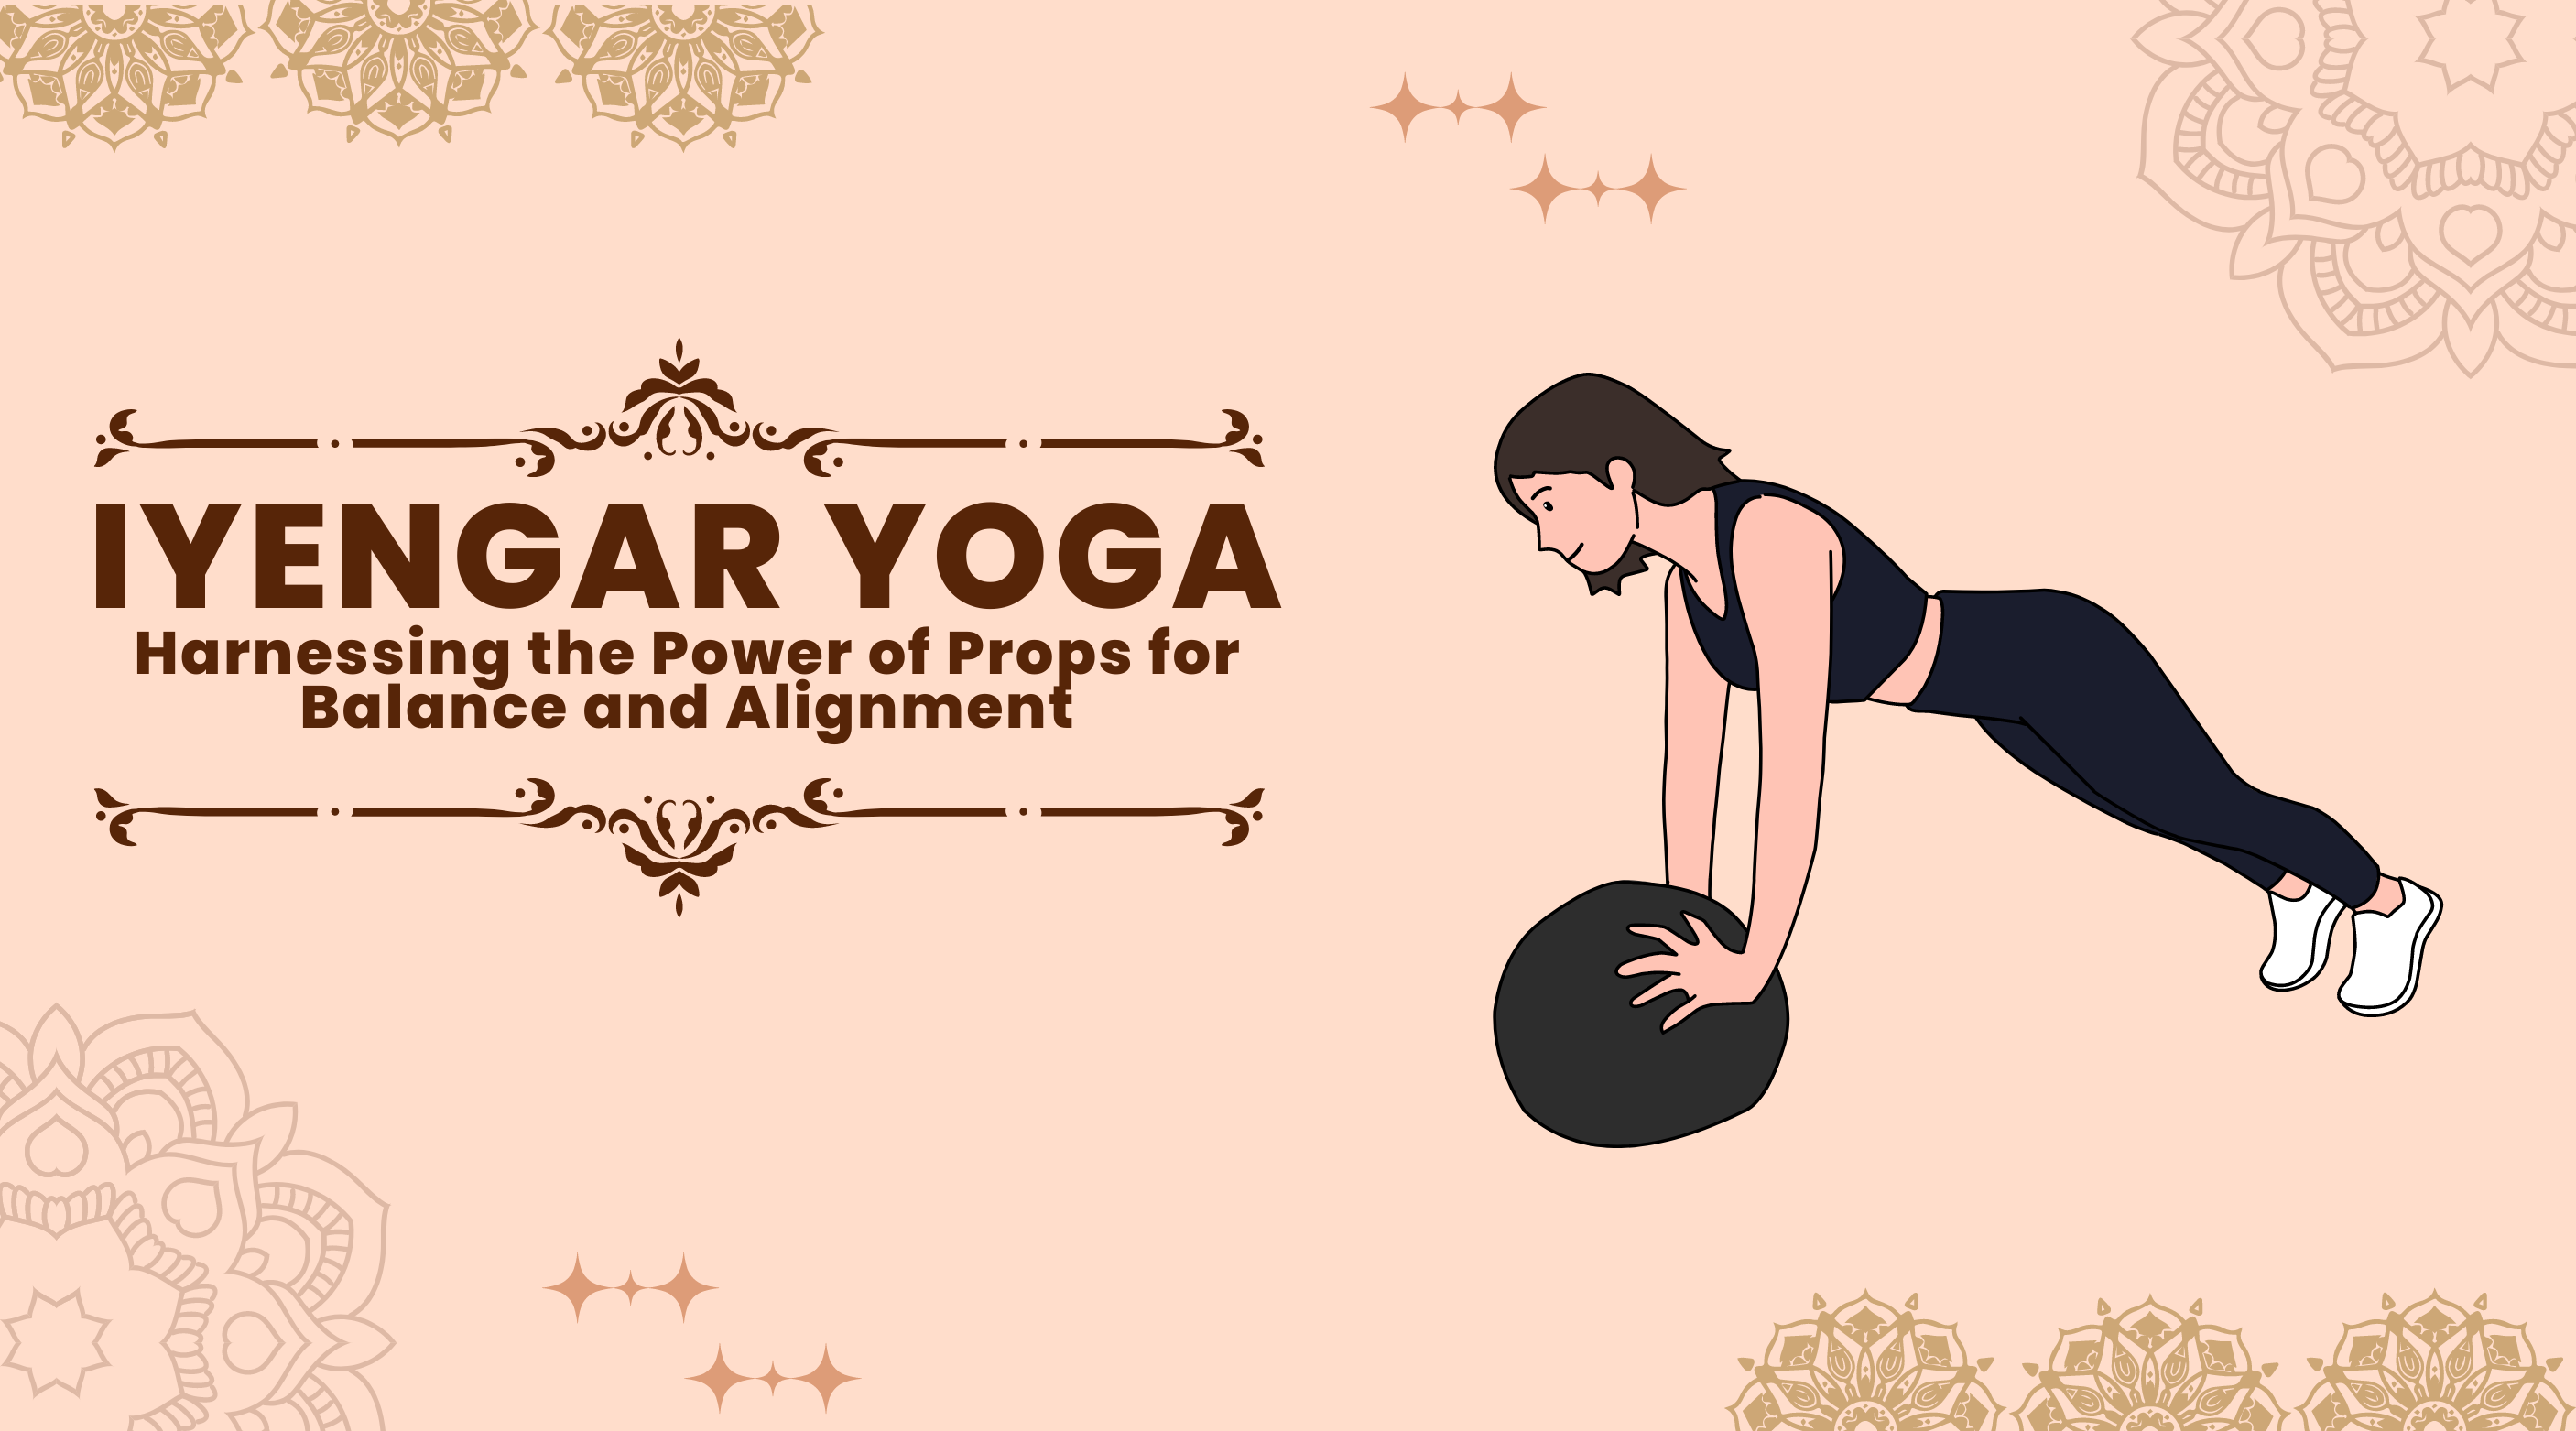 Iyengar Yoga: Harnessing the Power of Props for Balance and Alignment